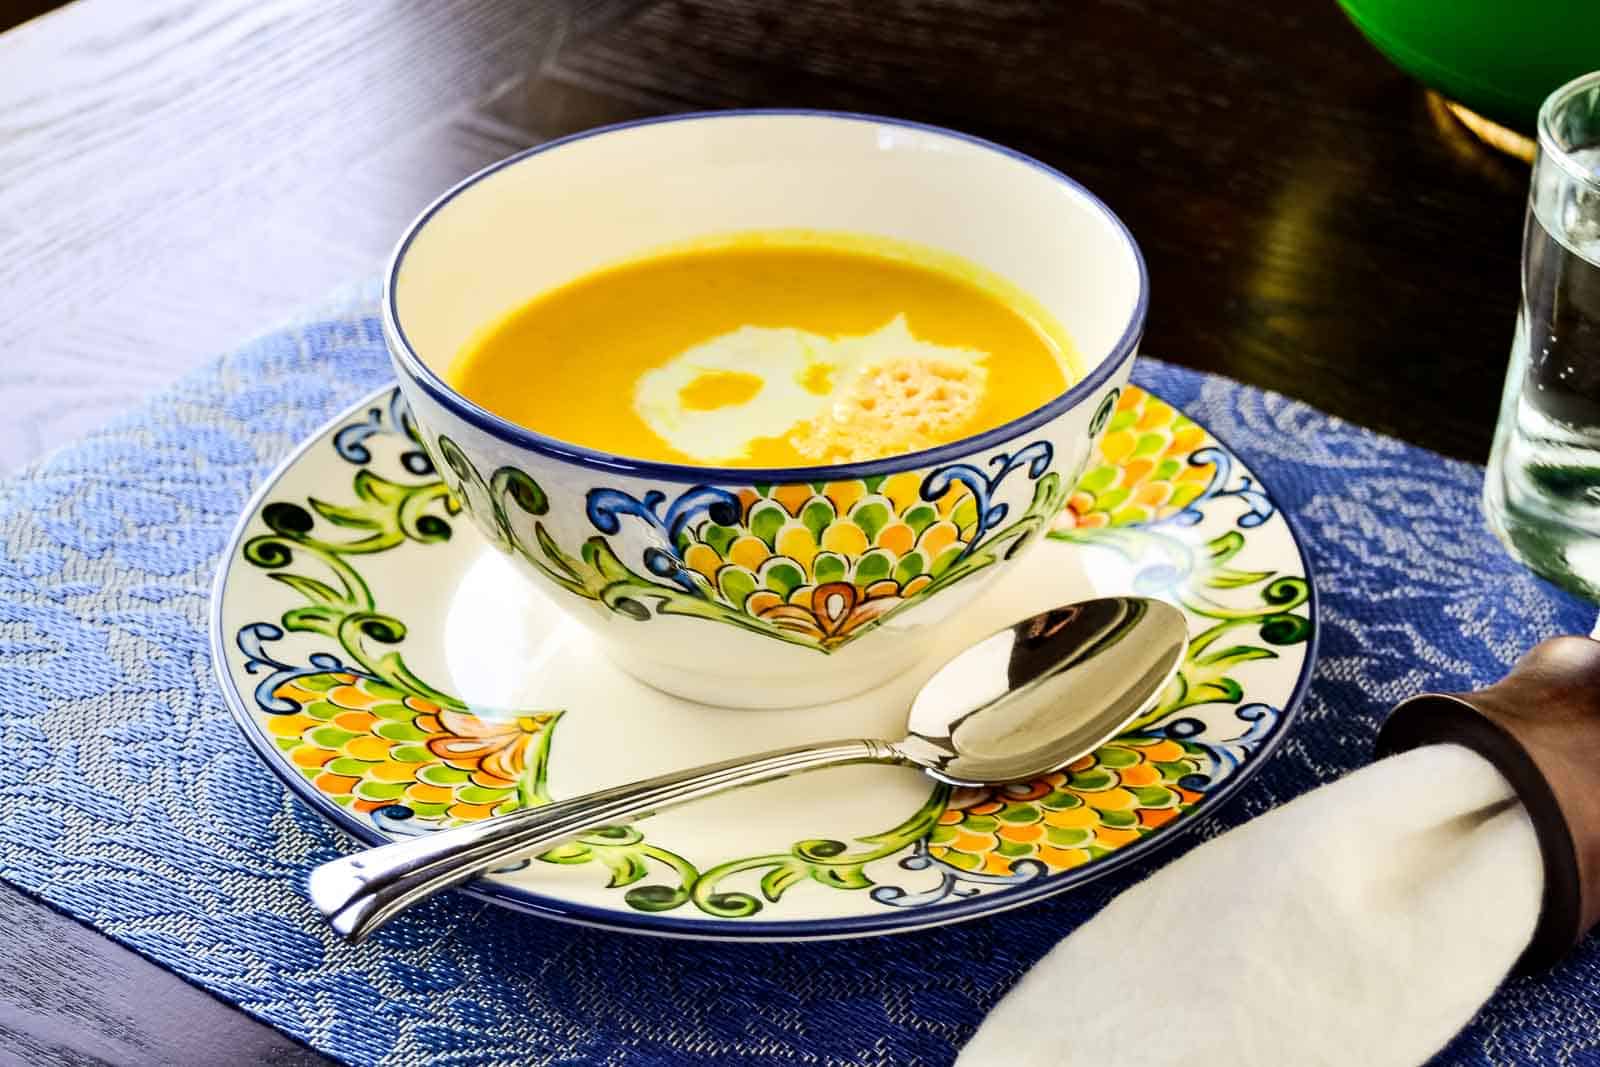 A bowl of butternut squash soup with a spoon on a colorful blue and white plate.